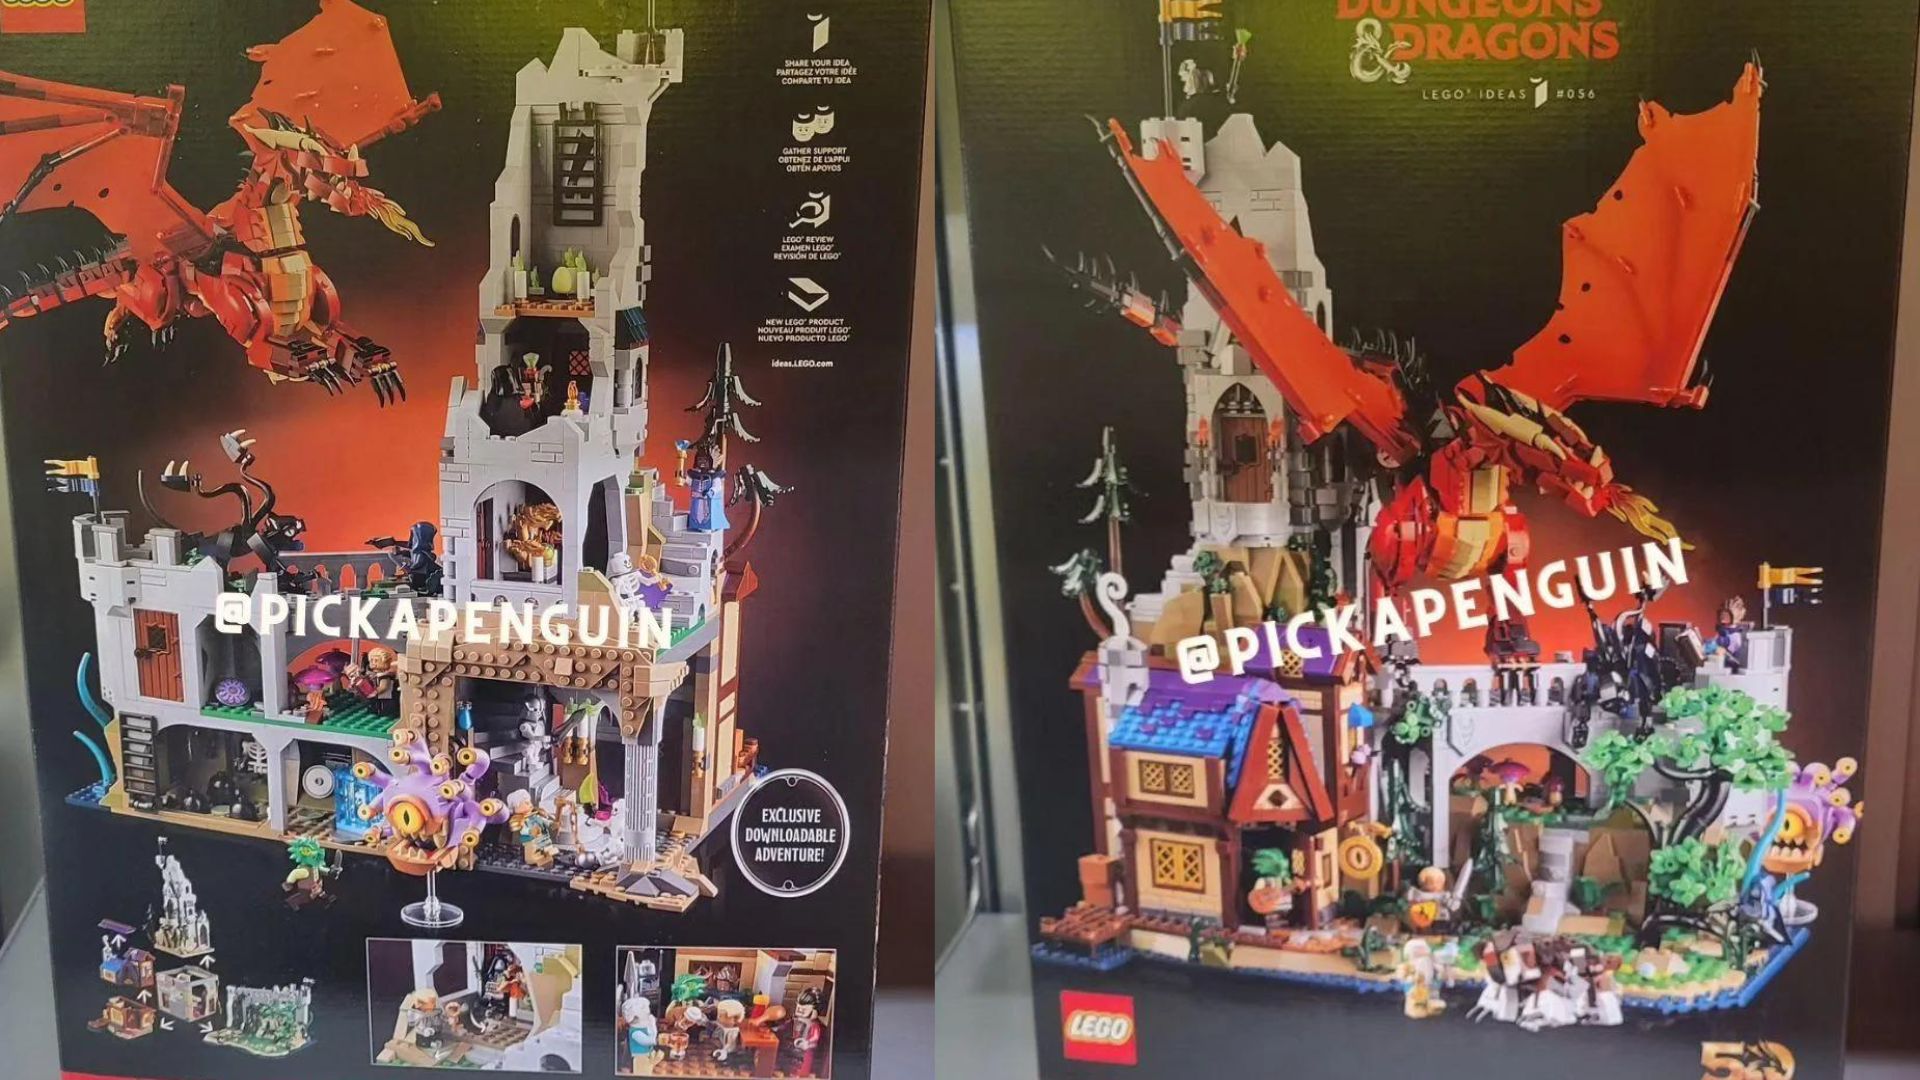 Front and back view of the box for the Lego D&D set